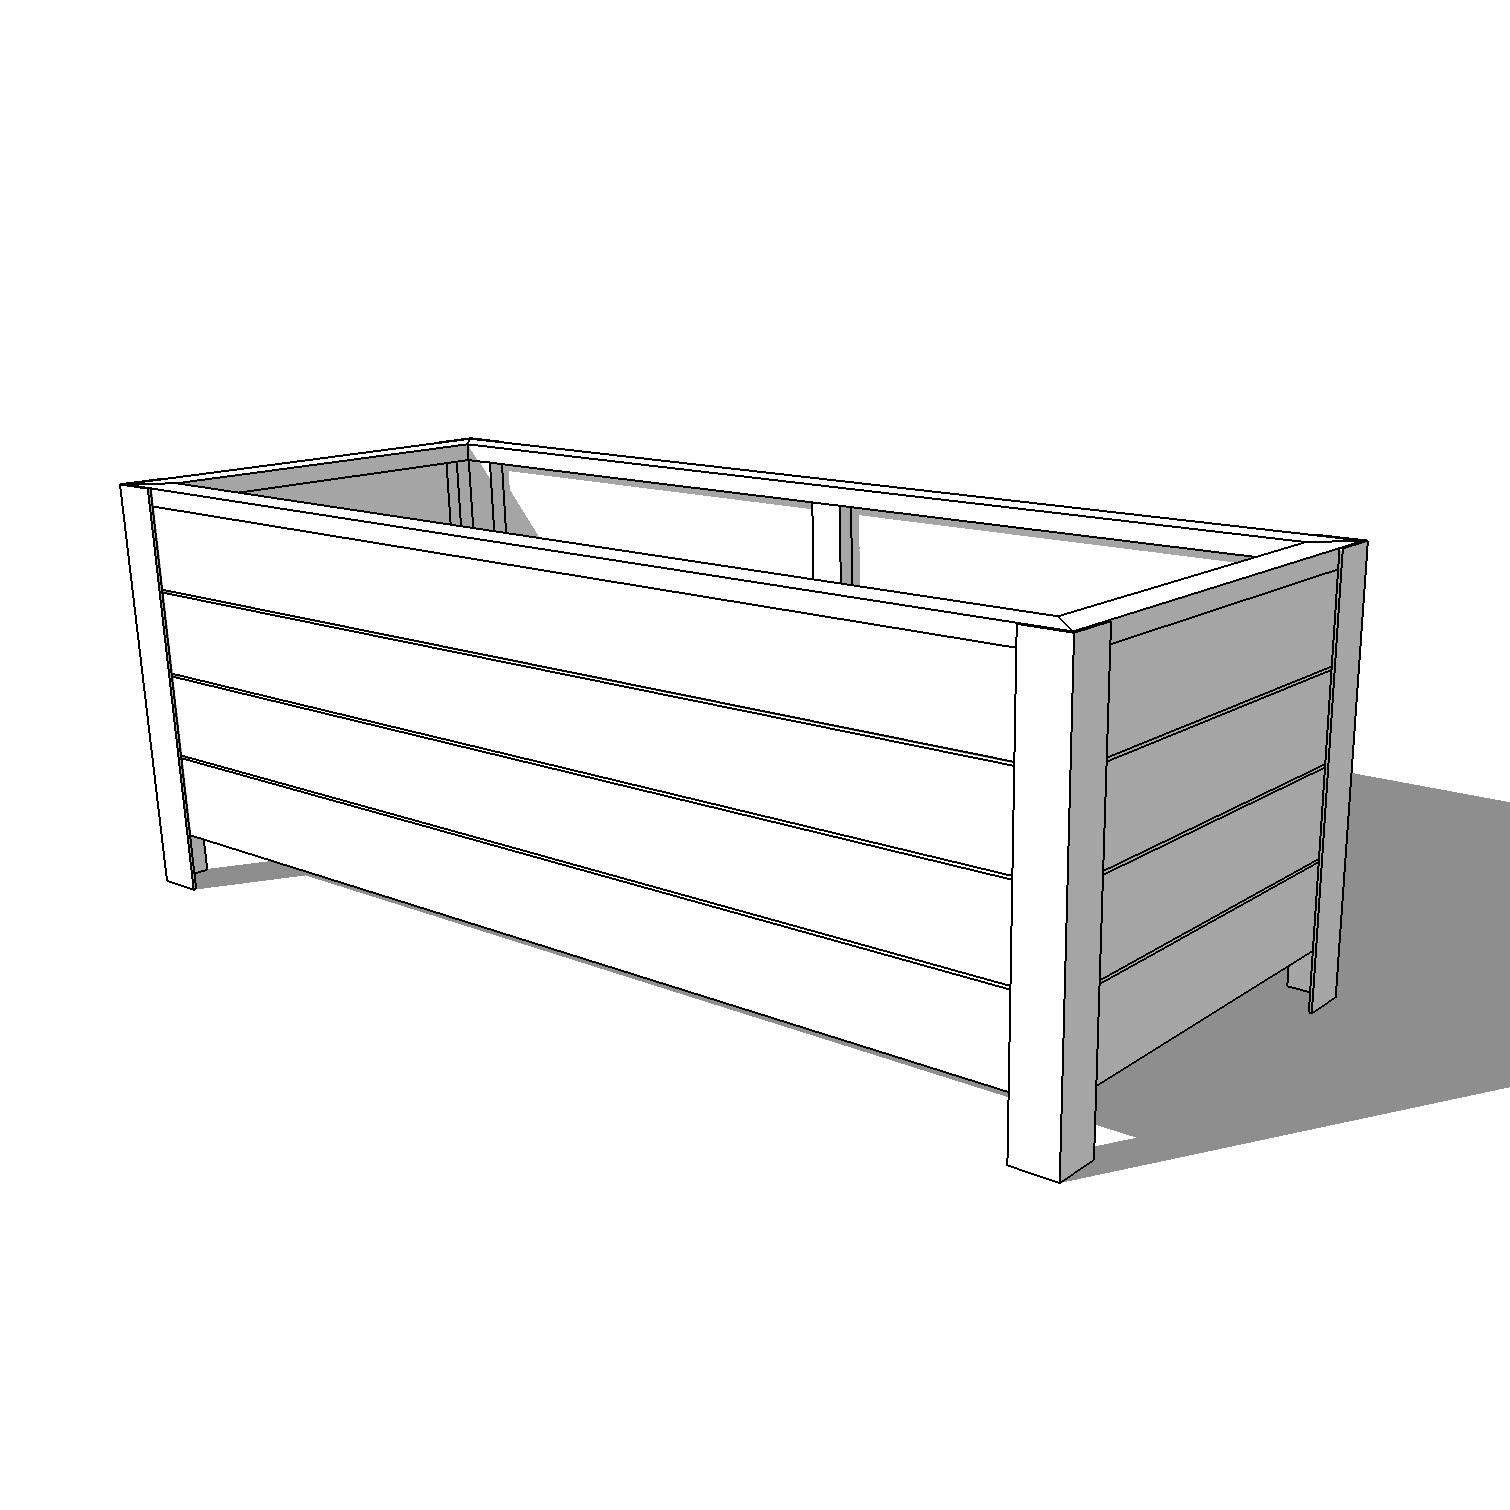 How To Build A DIY Modern Raised Planter Box — Crafted Workshop